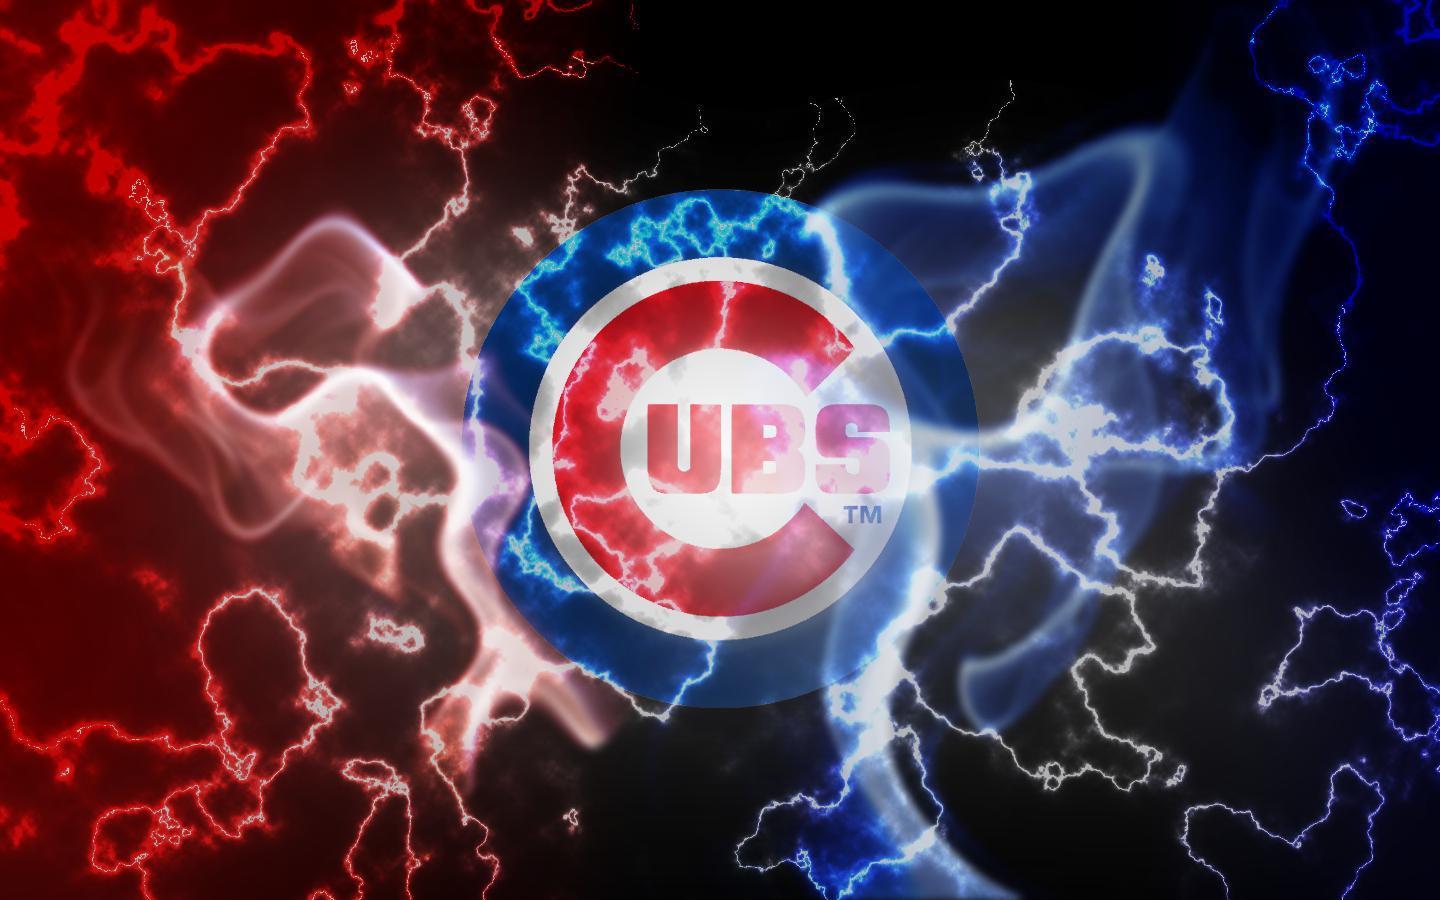 Chicago Cubs wallpaper. Chicago Cubs background